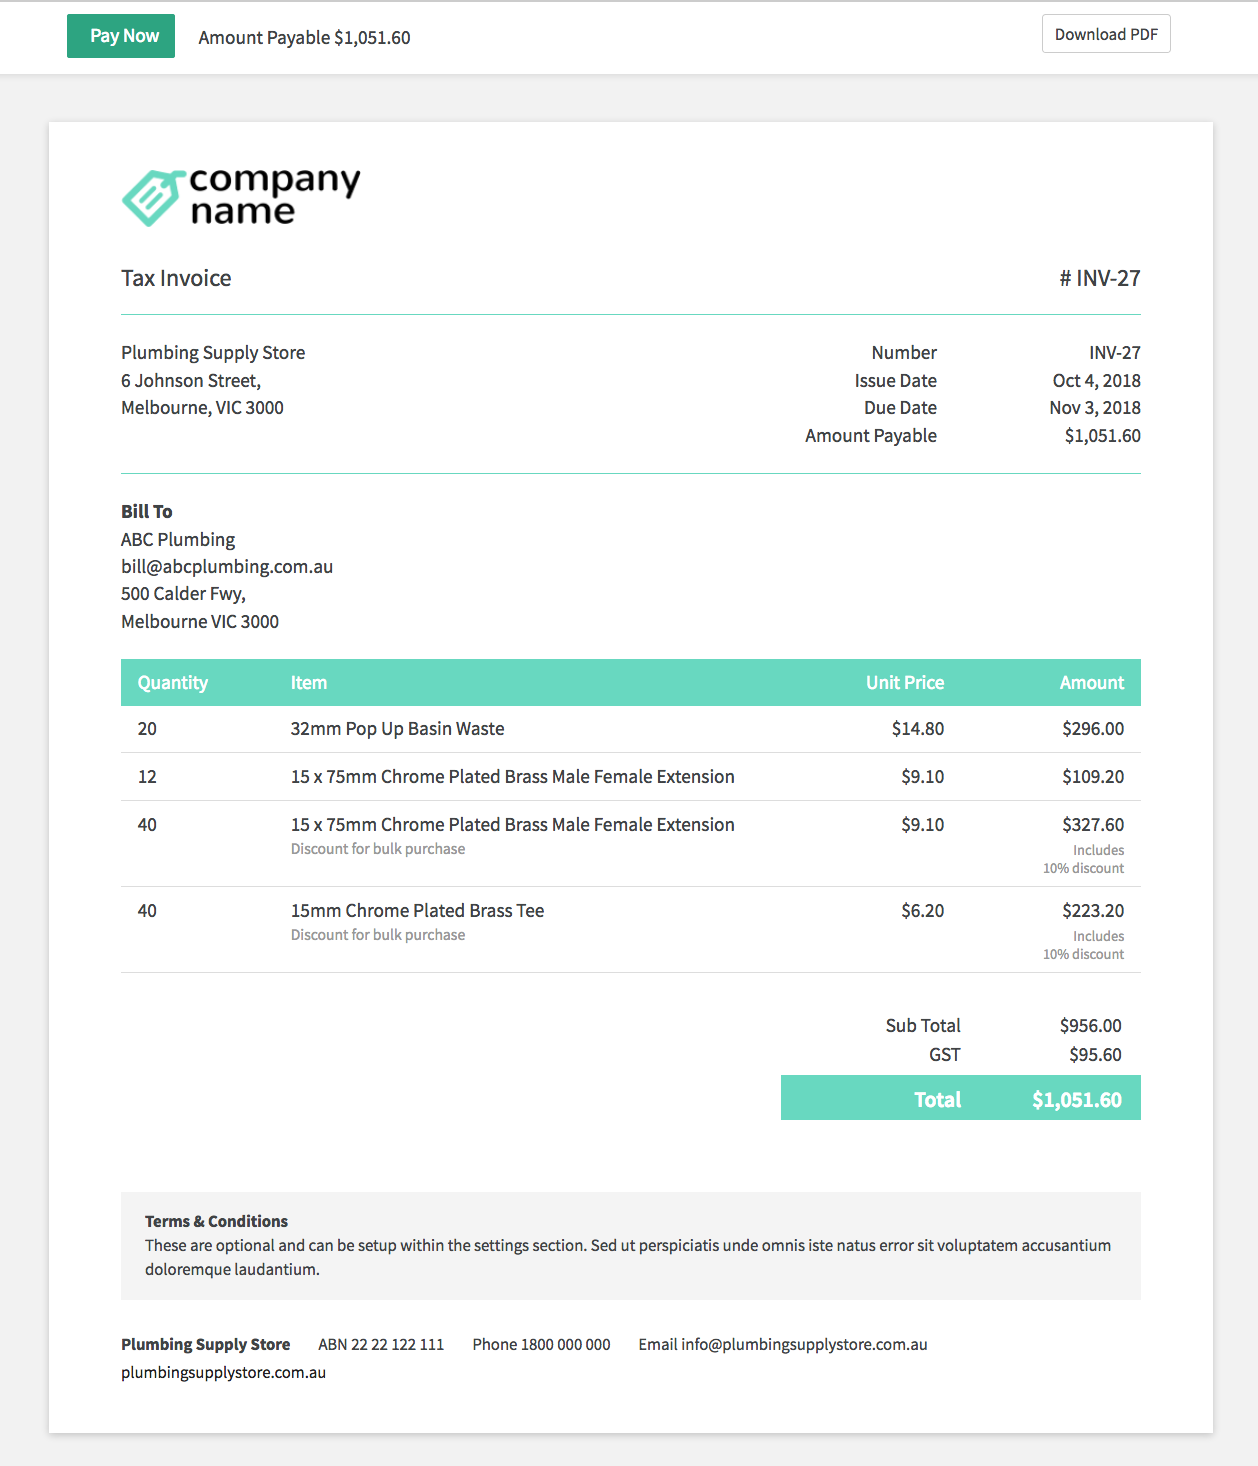 Australian tax invoice template - suitable for sole trader